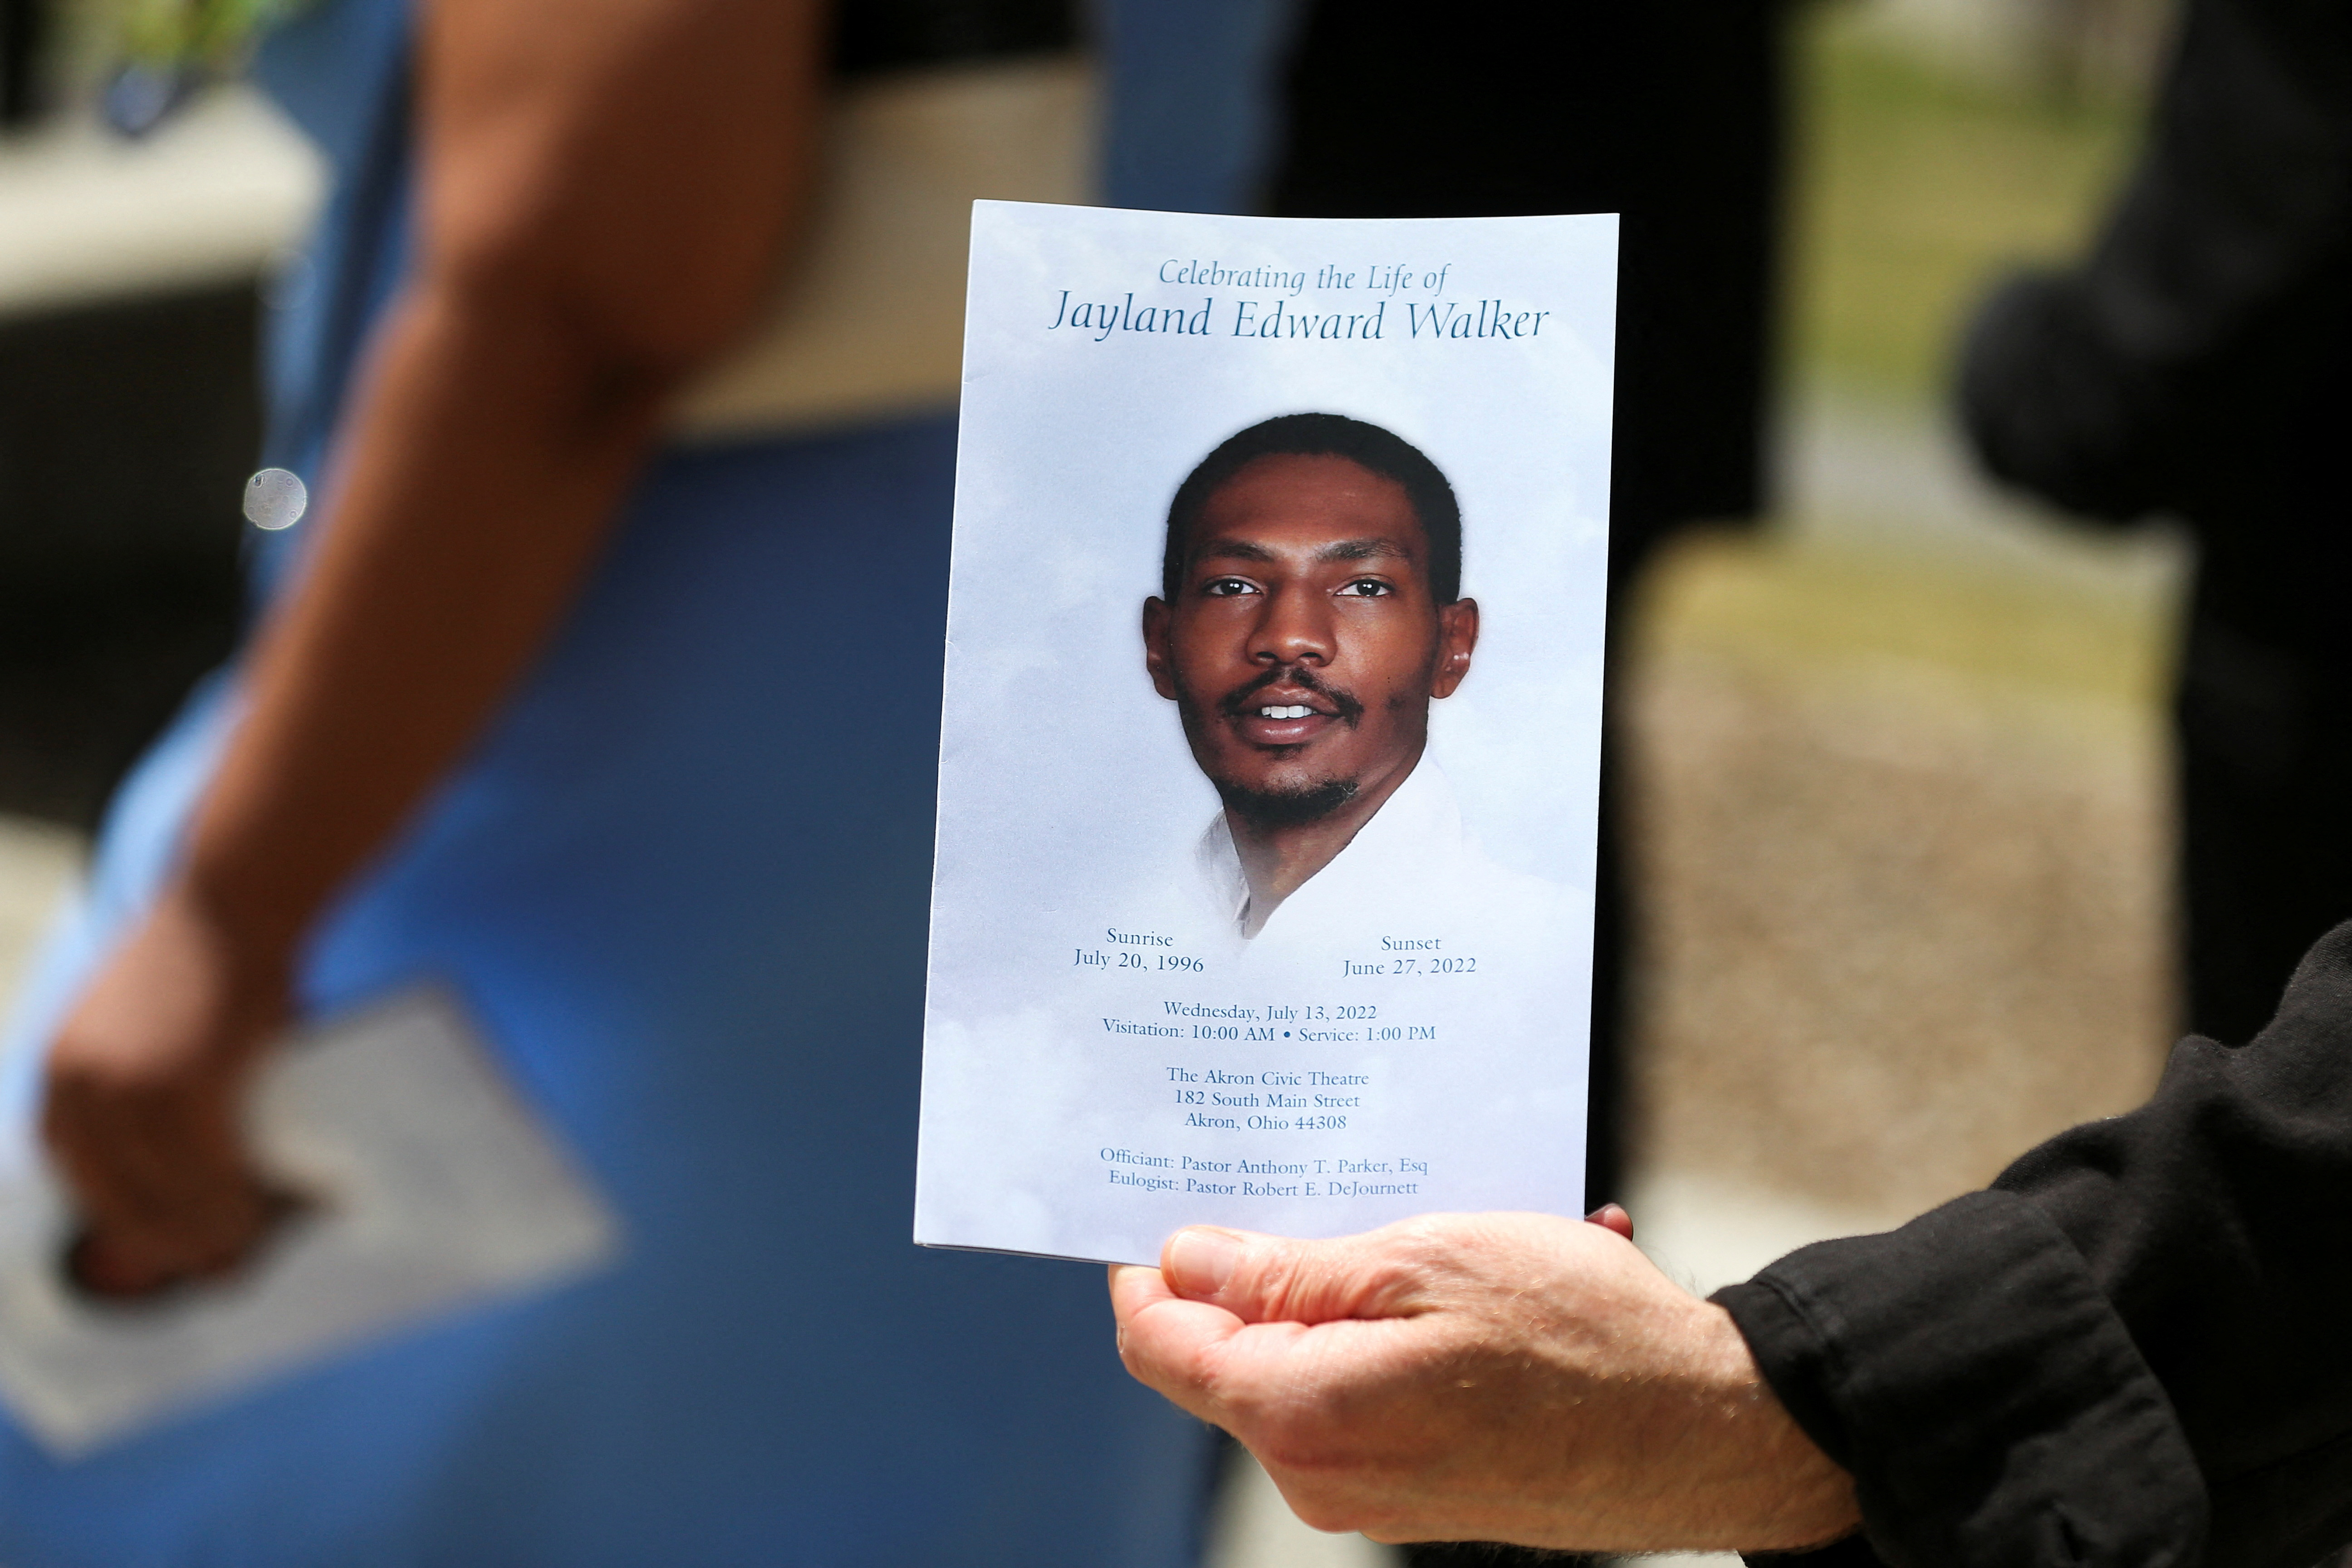 Autopsy Shows Eight Ohio Police Officers Shot Unarmed Jayland Walker 46 Times